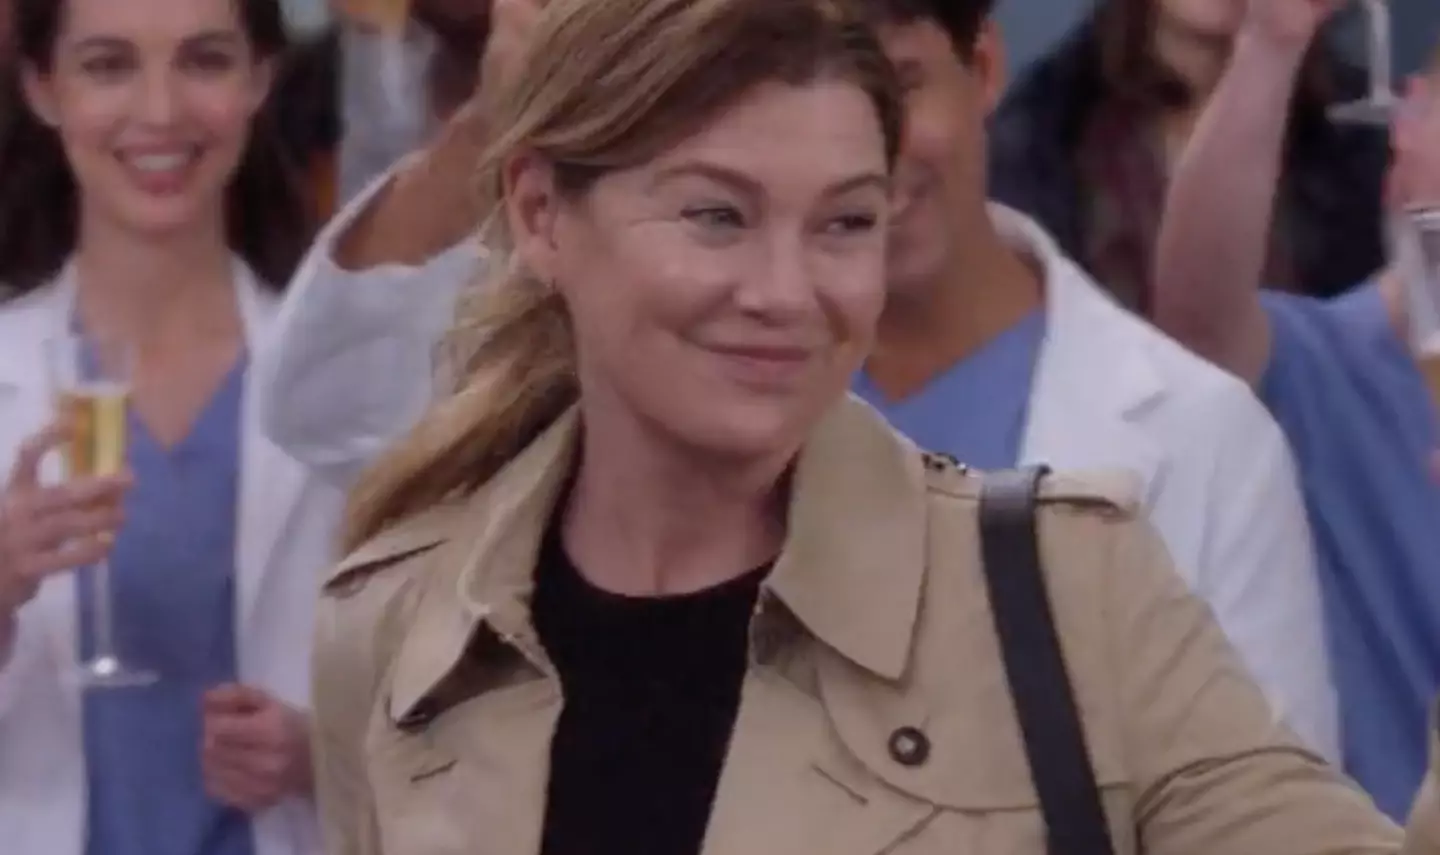 A recent promo clip teased Meredith's departure.